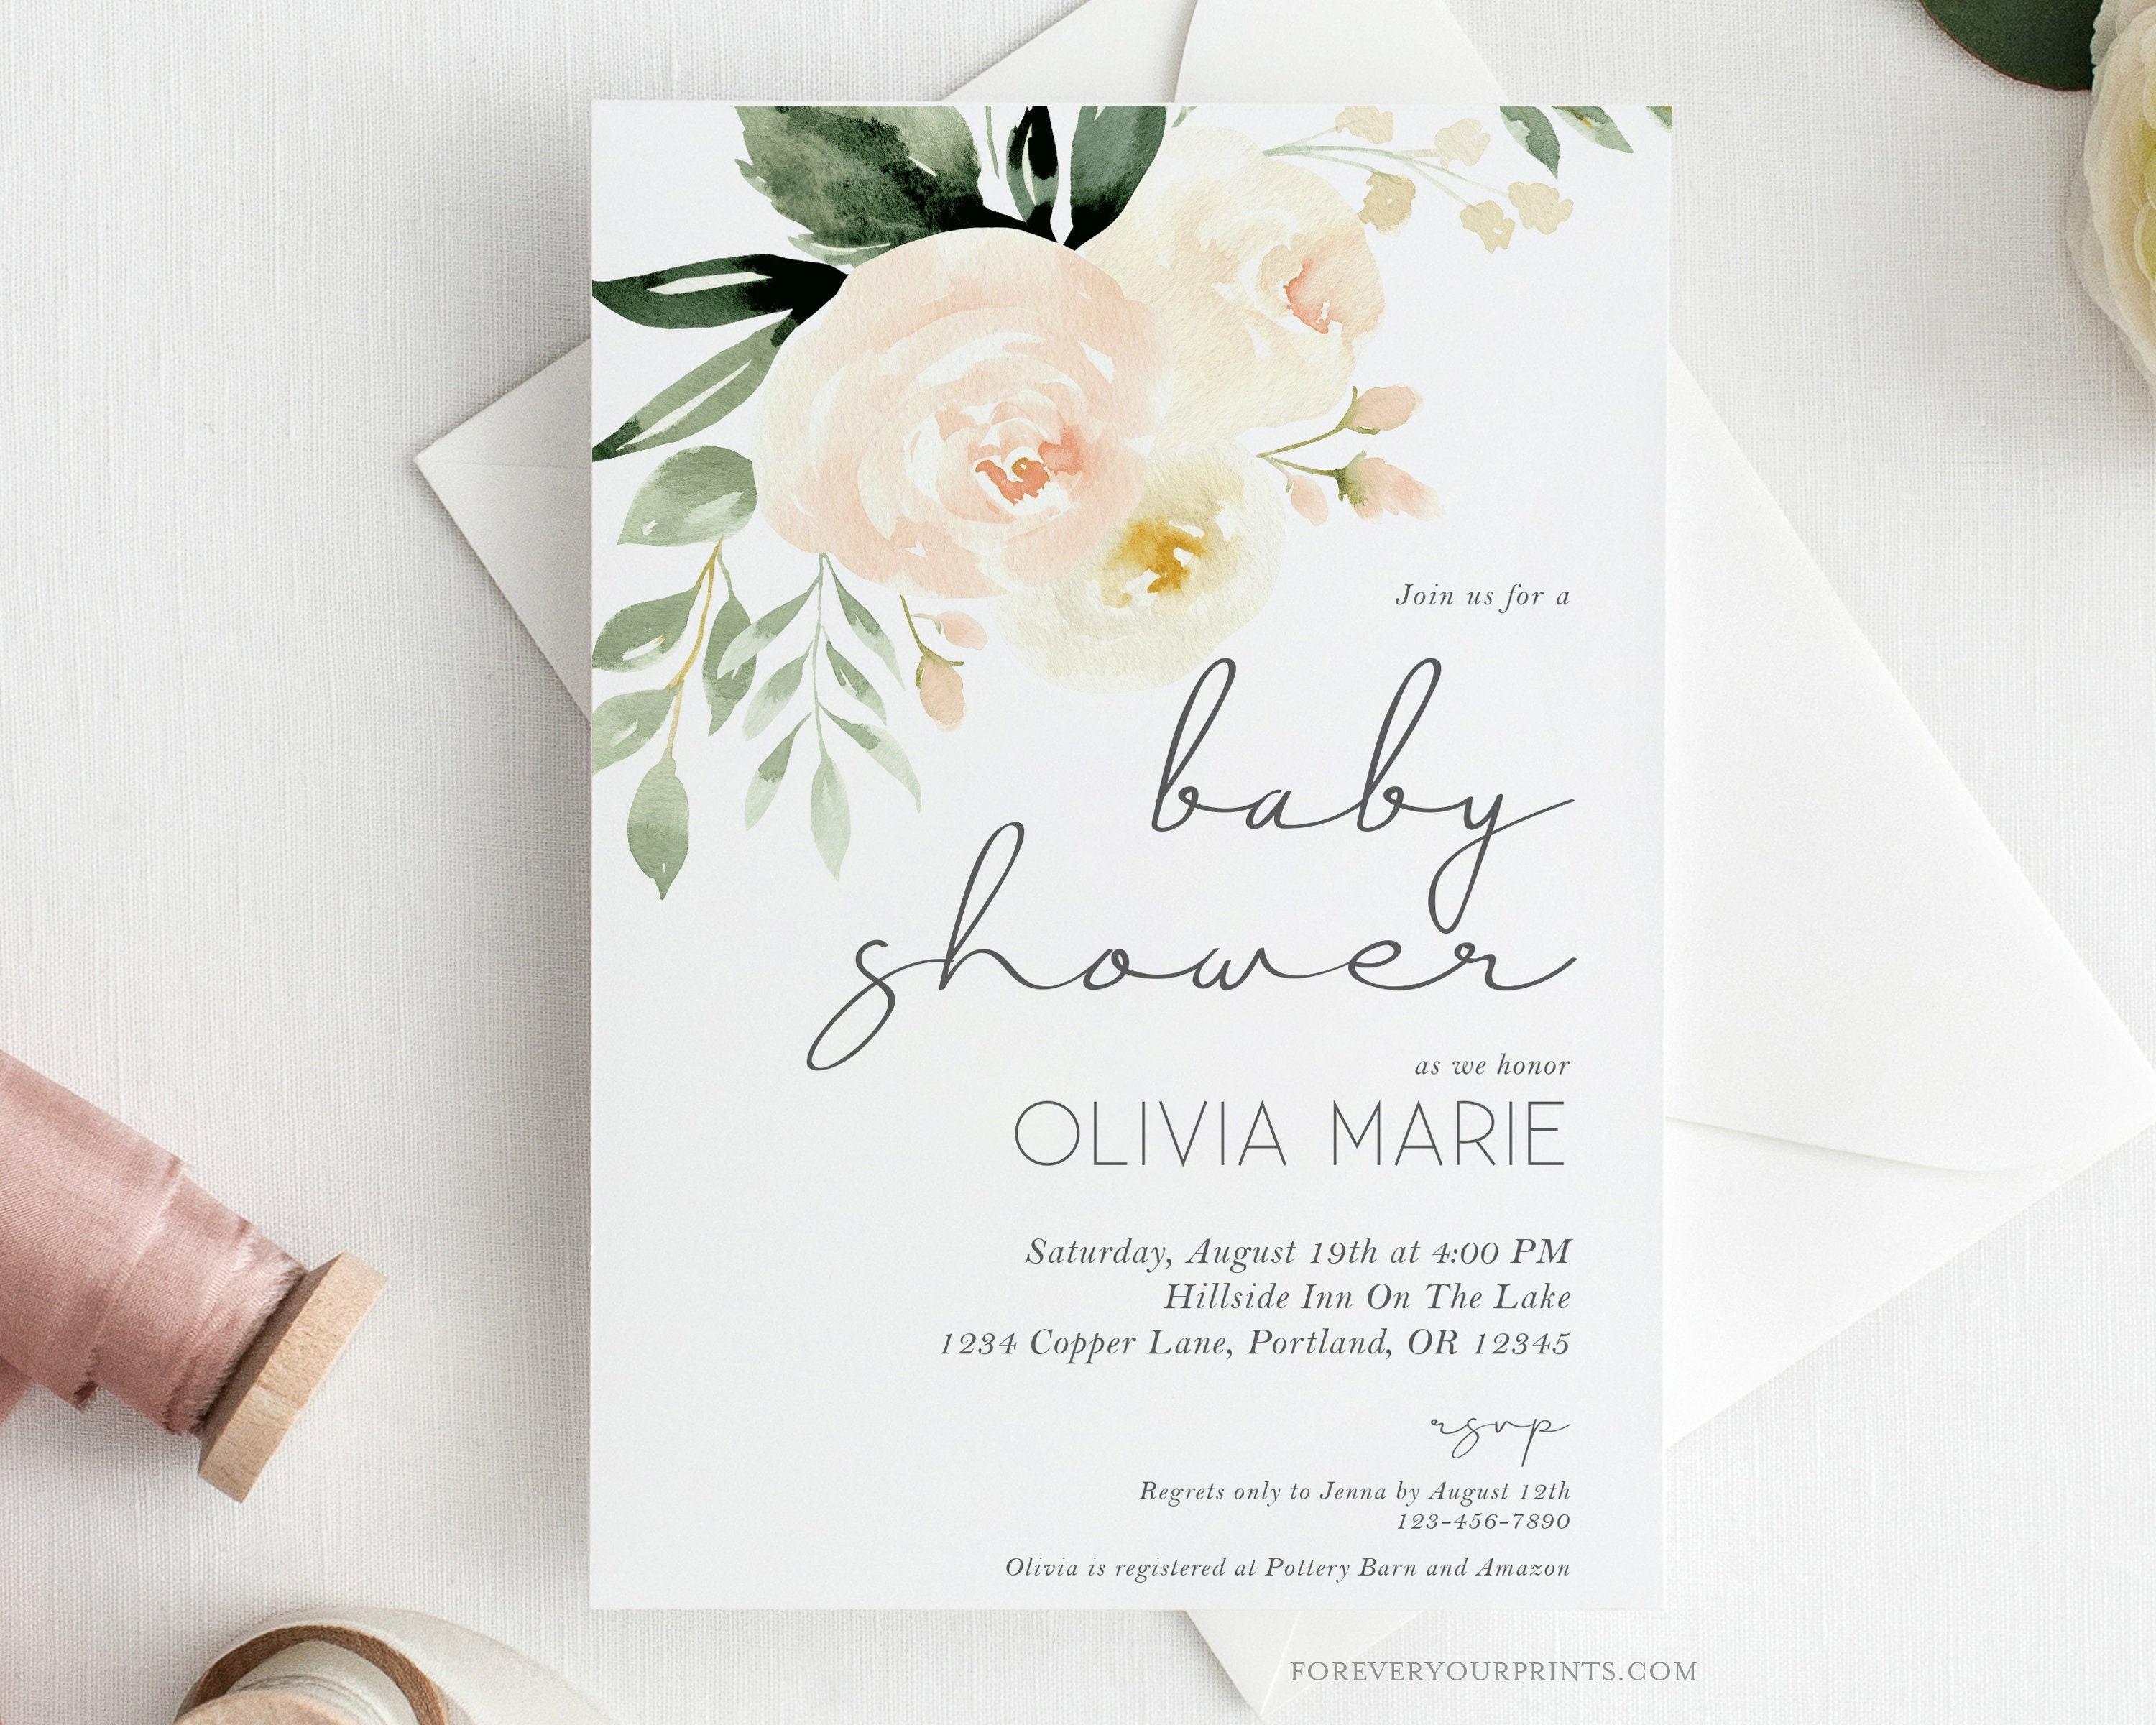 Baby Girl Shower Invitation Template 100% Editable Text image pic